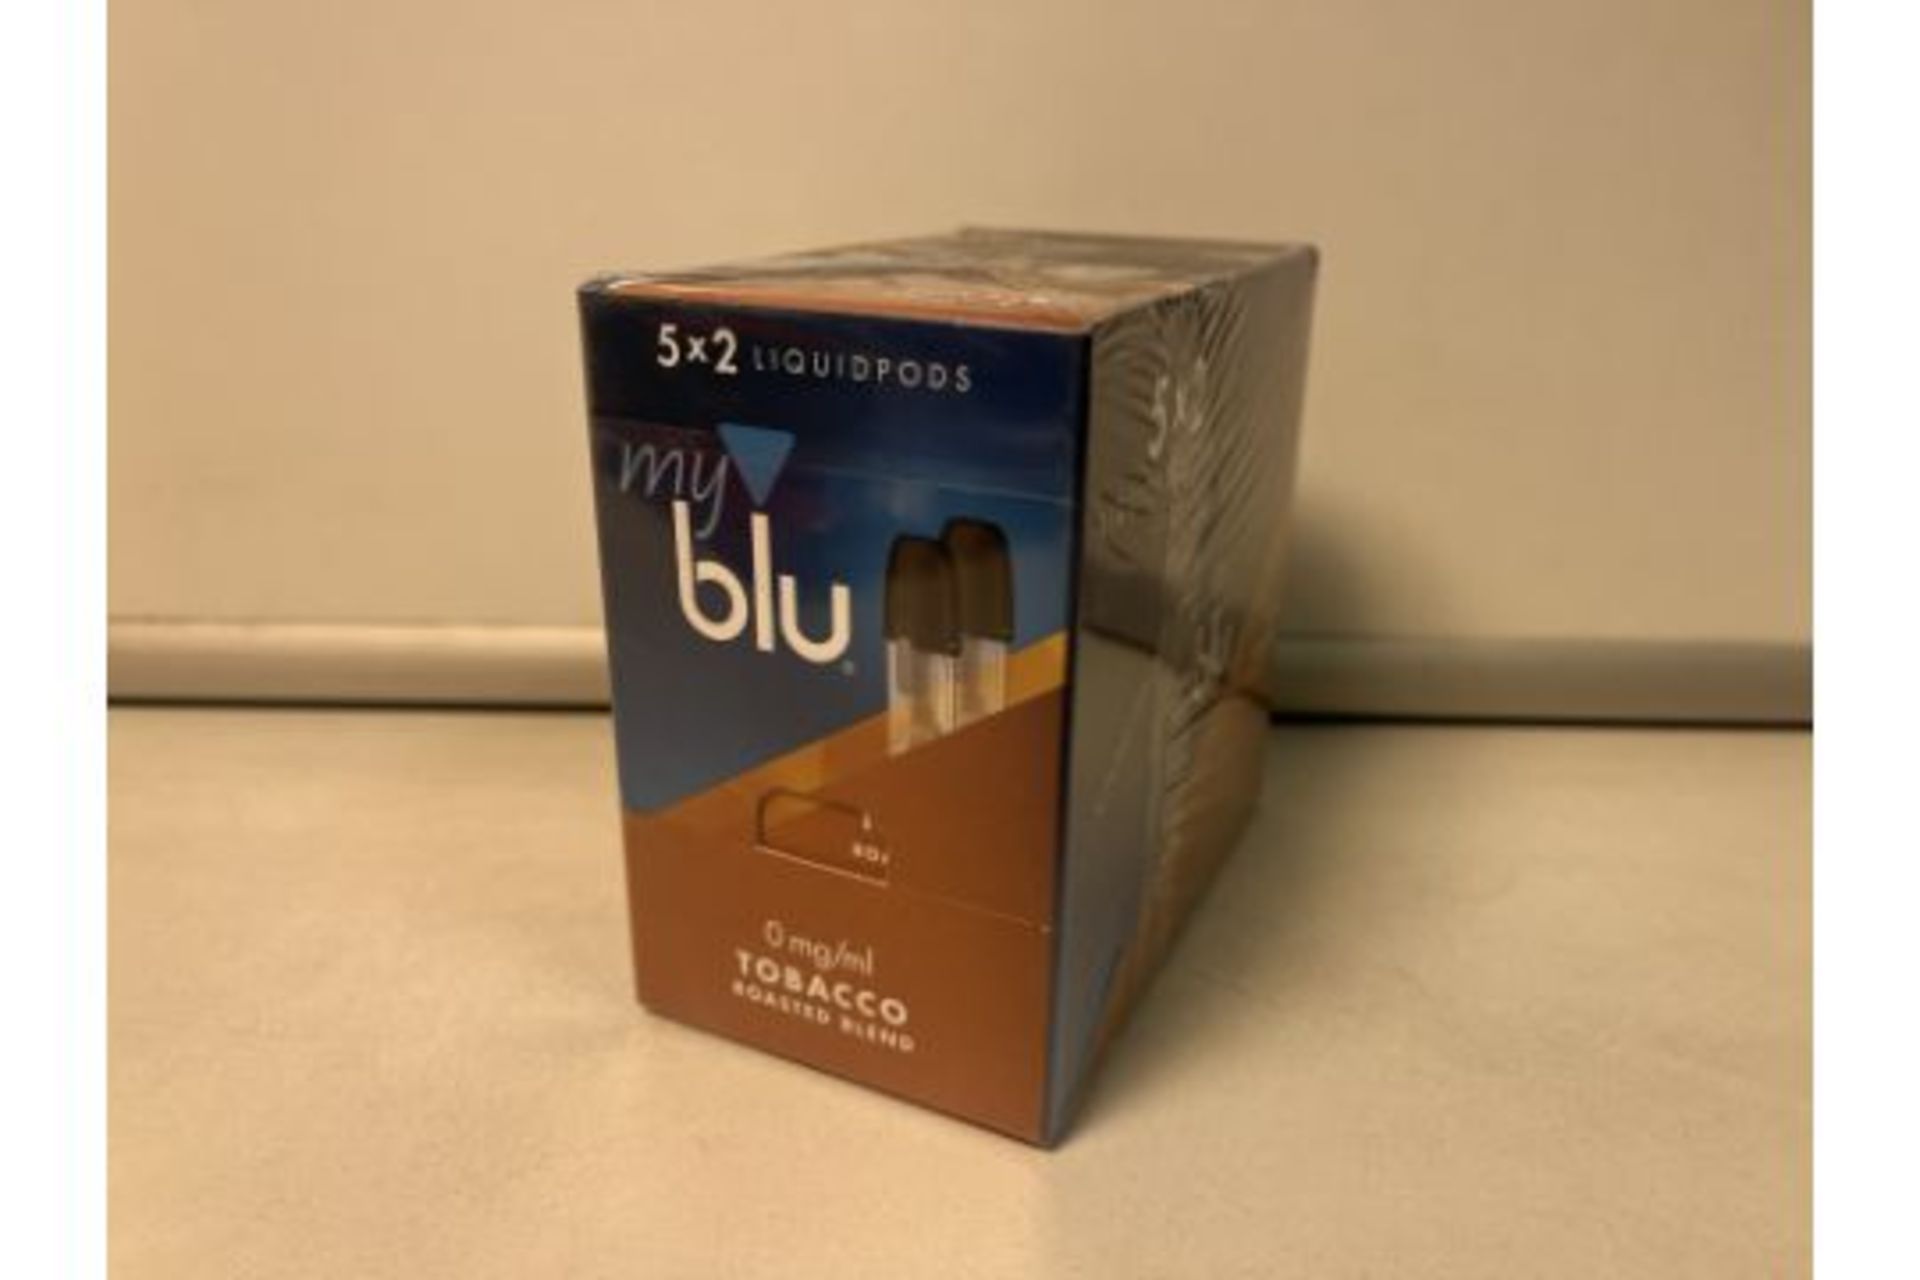 120 X NEW PACKAGED PACKS OF 2 MYBLU LIQUIDPODS. 0MG TOBACCO (ROW1MID)